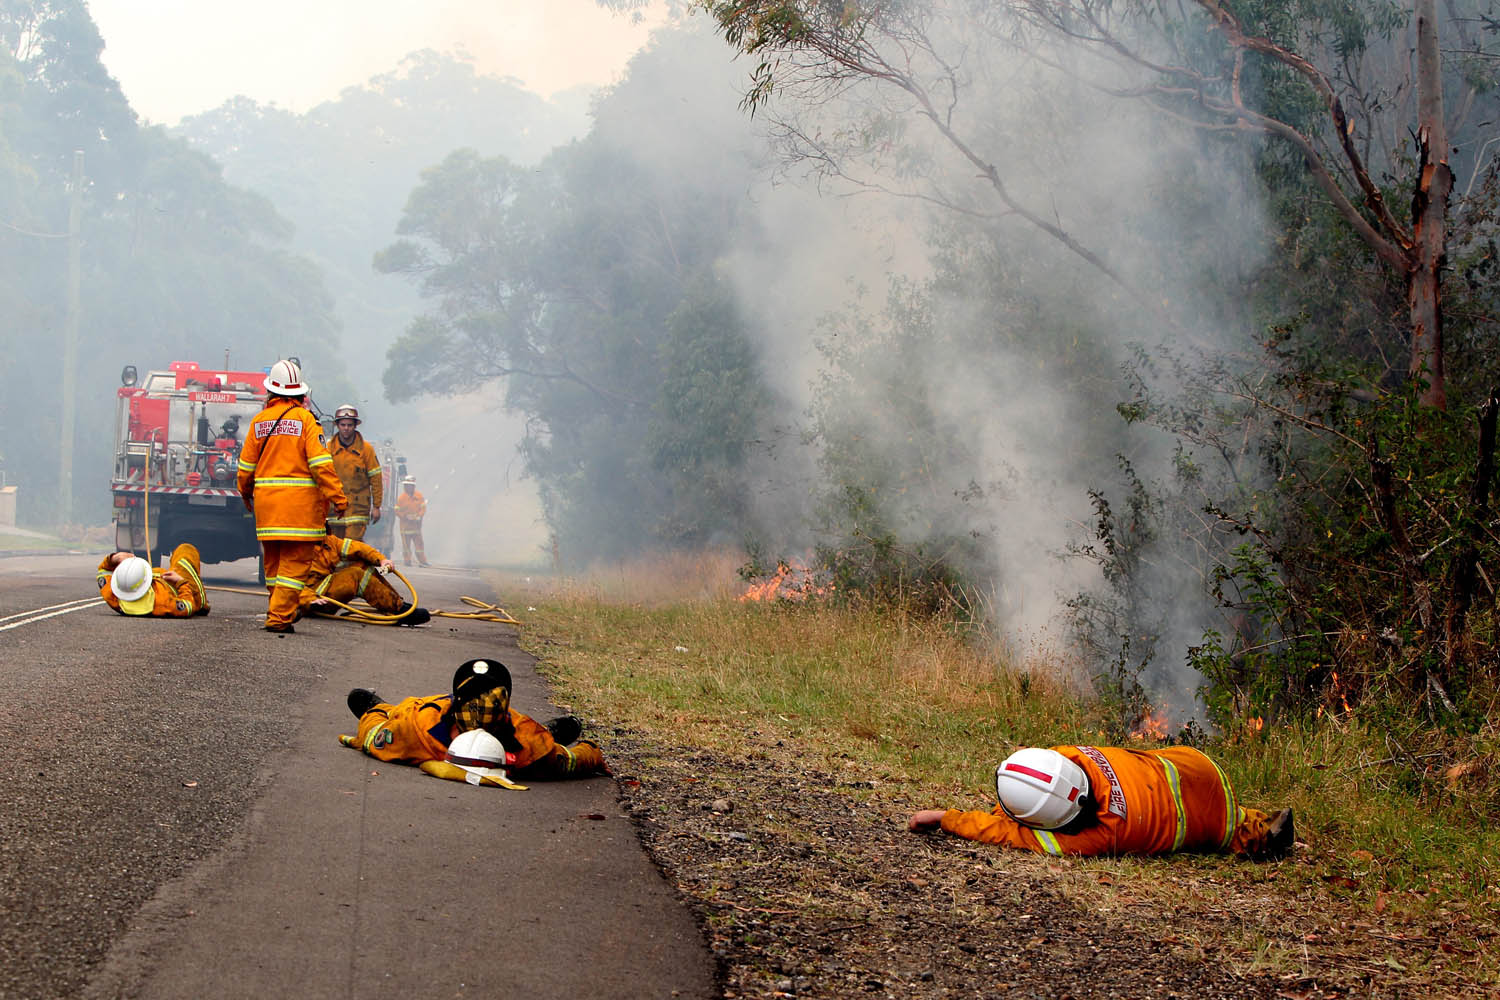 Oct. 18, 2013. Exhausted firefighters take a rest while fire burns close by, on Crangan Bay Road in Nords Wharf, Australia.